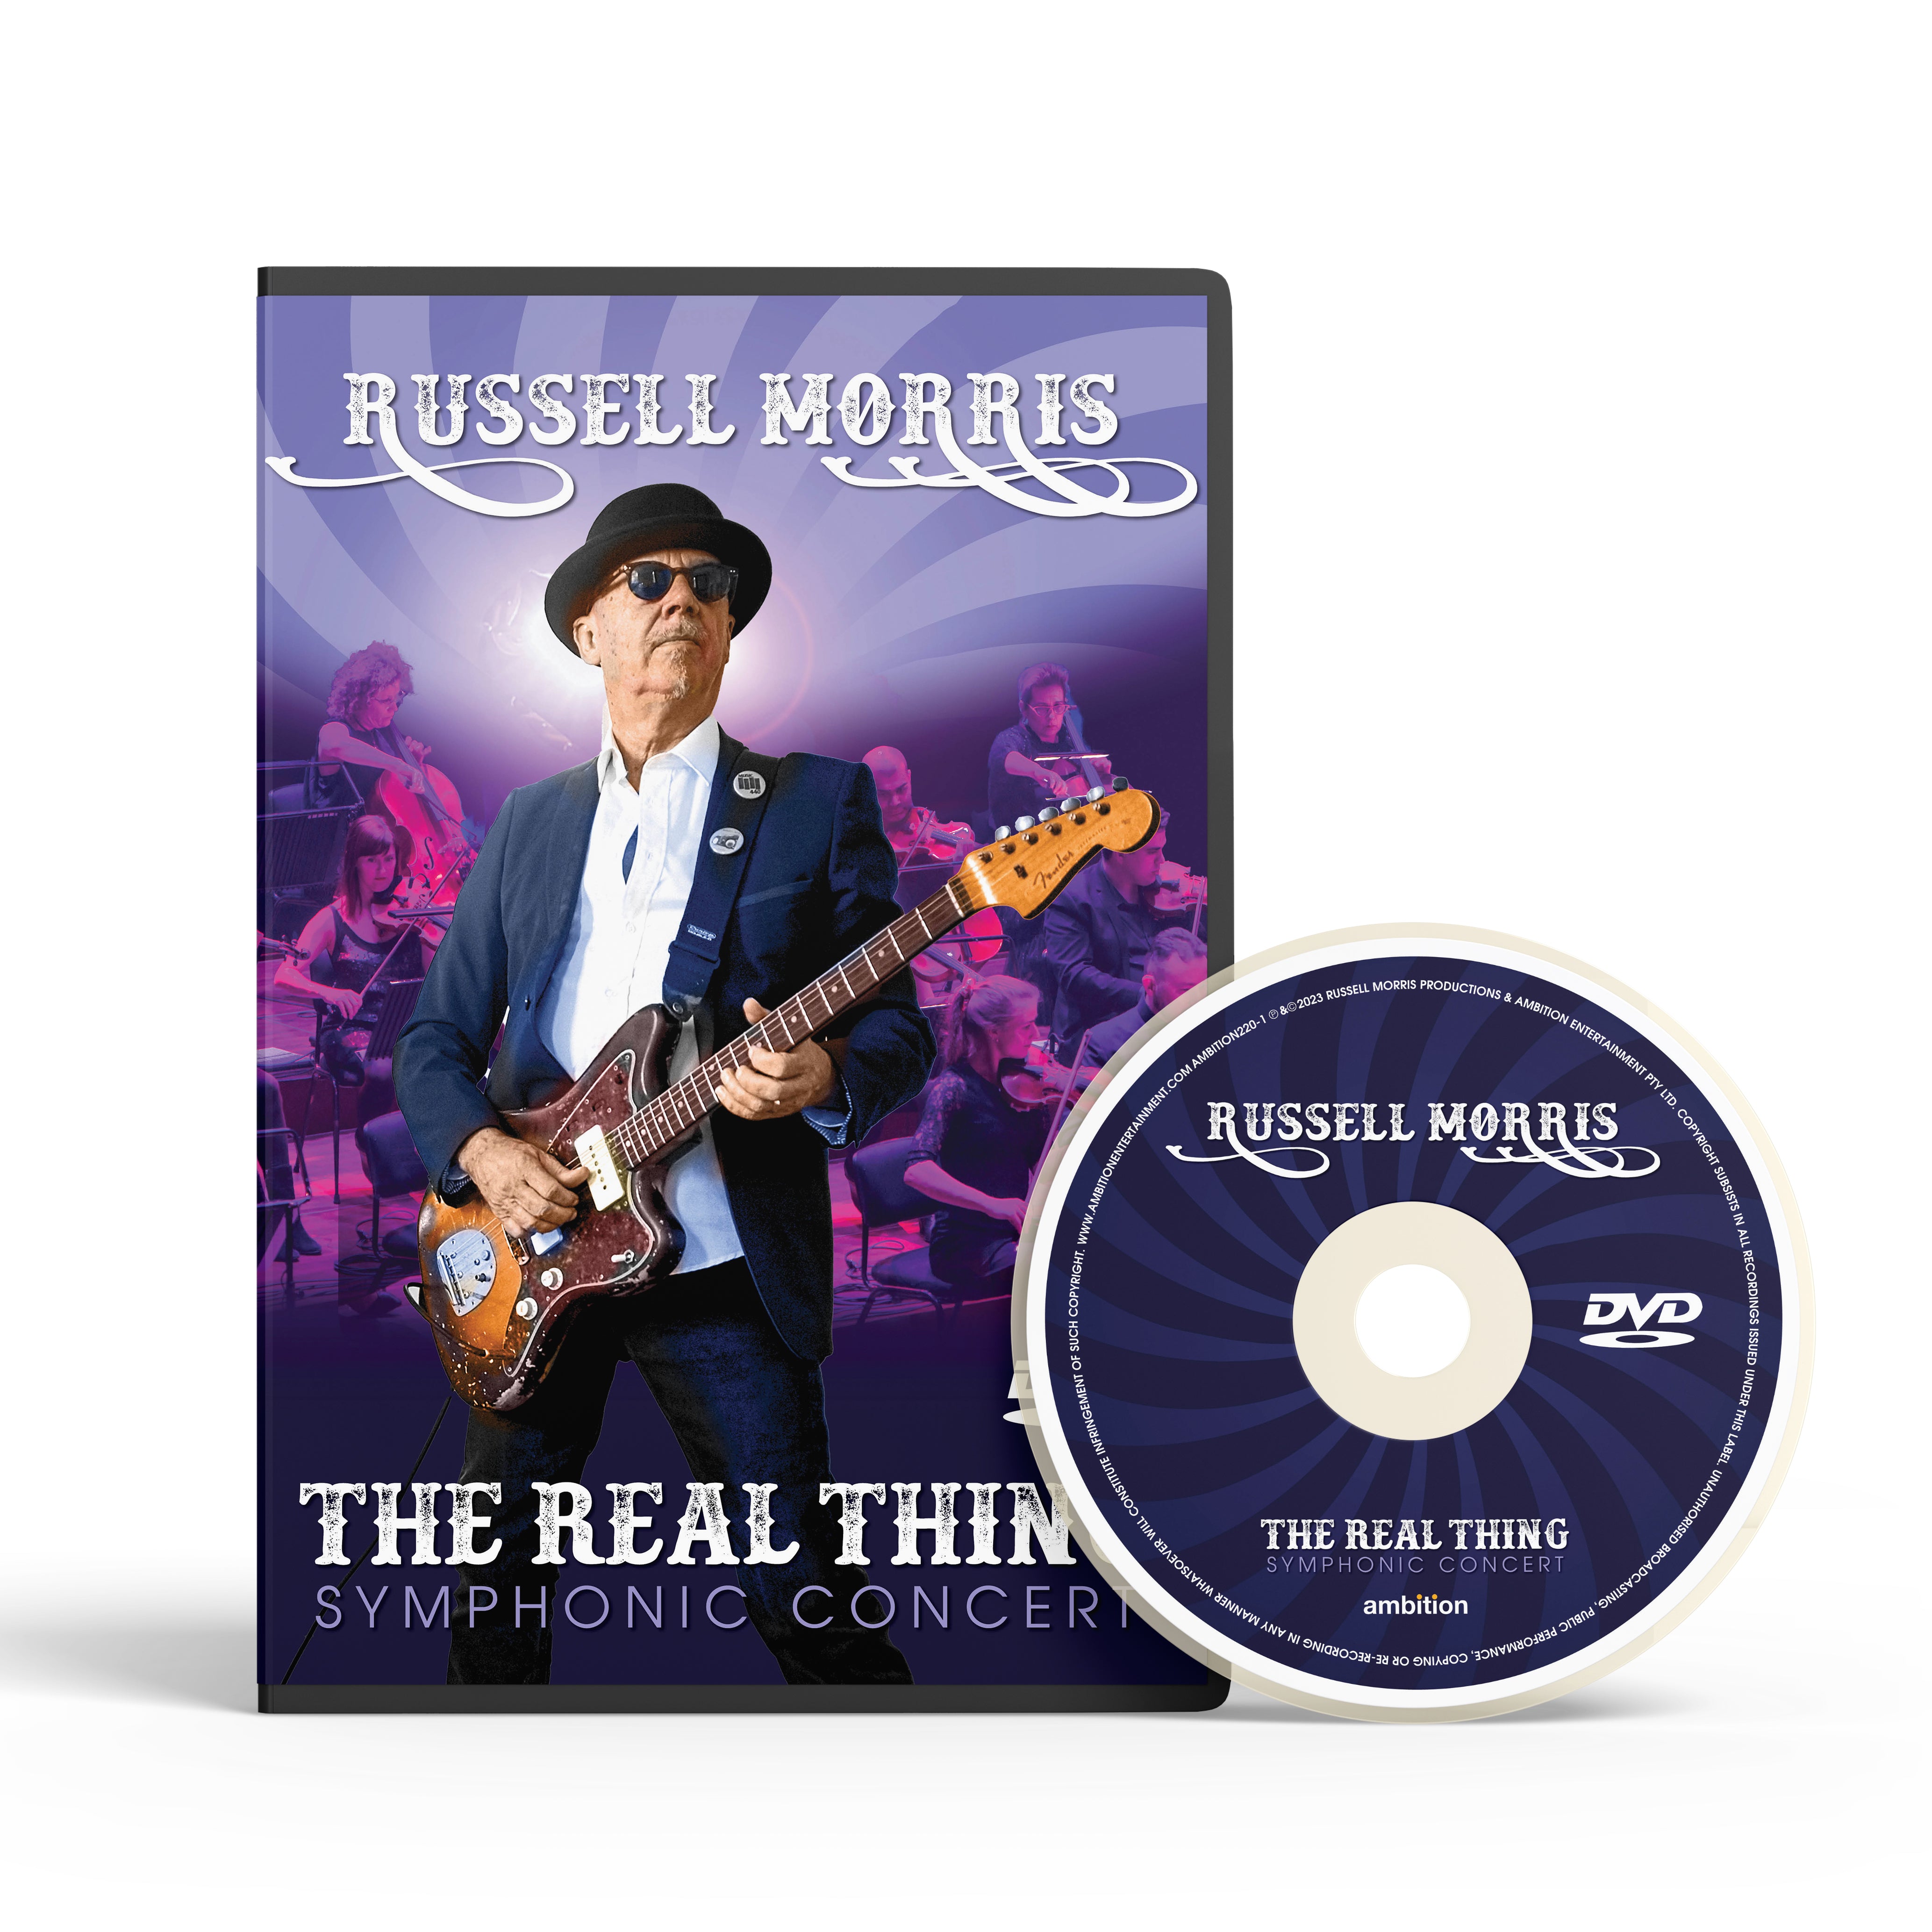 RUSSELL MORRIS - THE REAL THING (SYMPHONIC CONCERT) - DVD